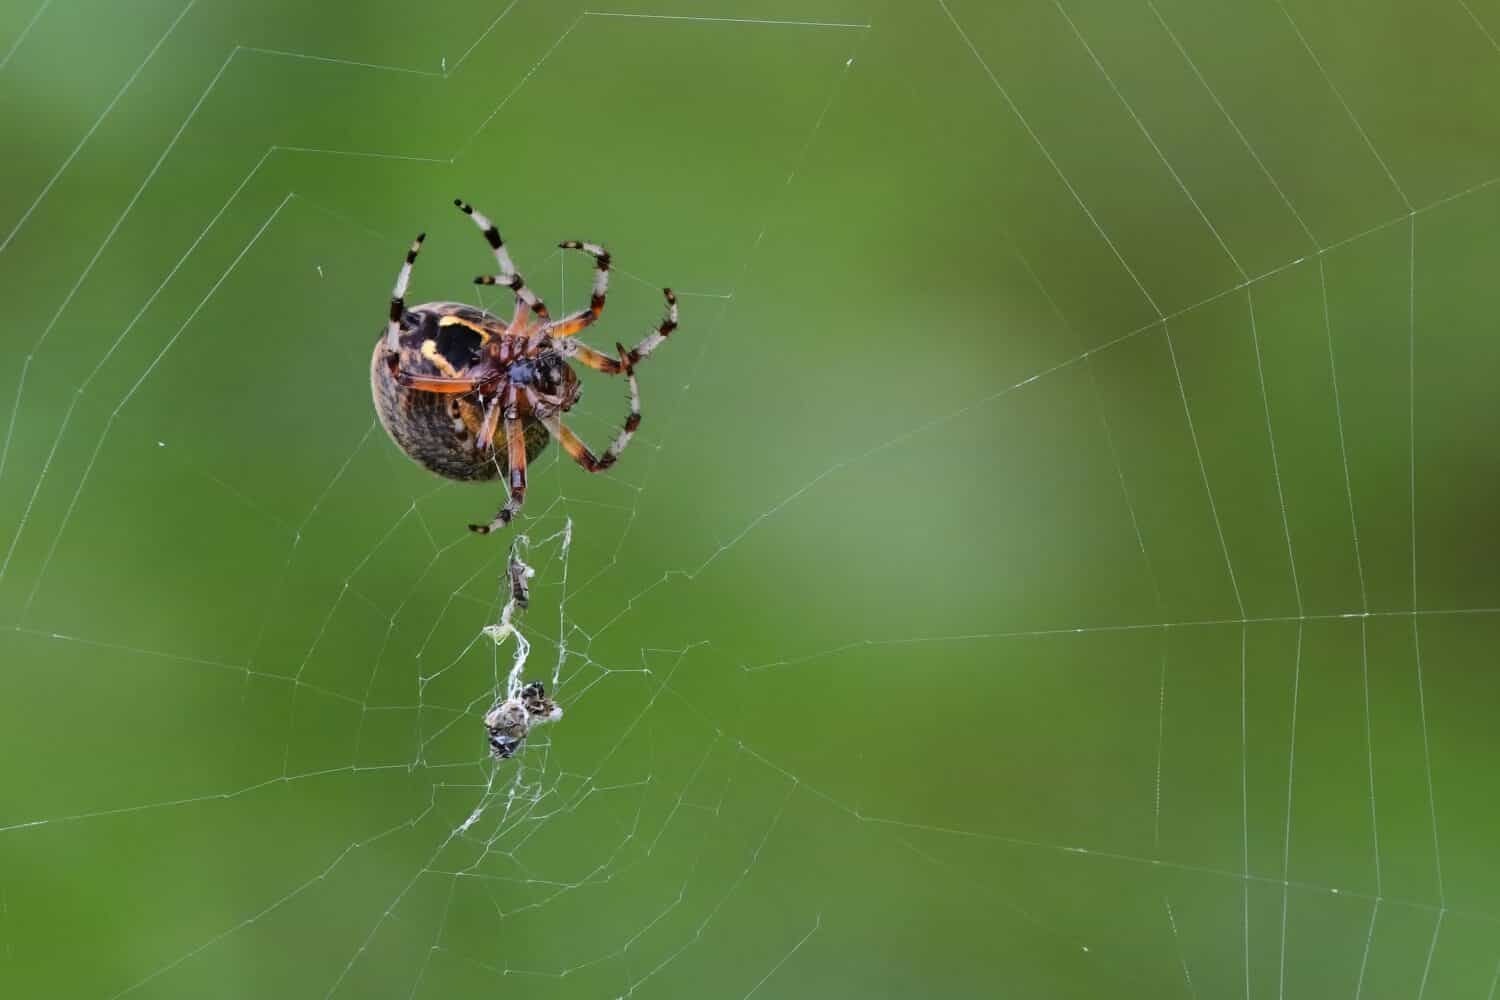 A Marbled Orb Weaver (Araneus marmoreus) works on weaving a web in Alaska's boreal forest.